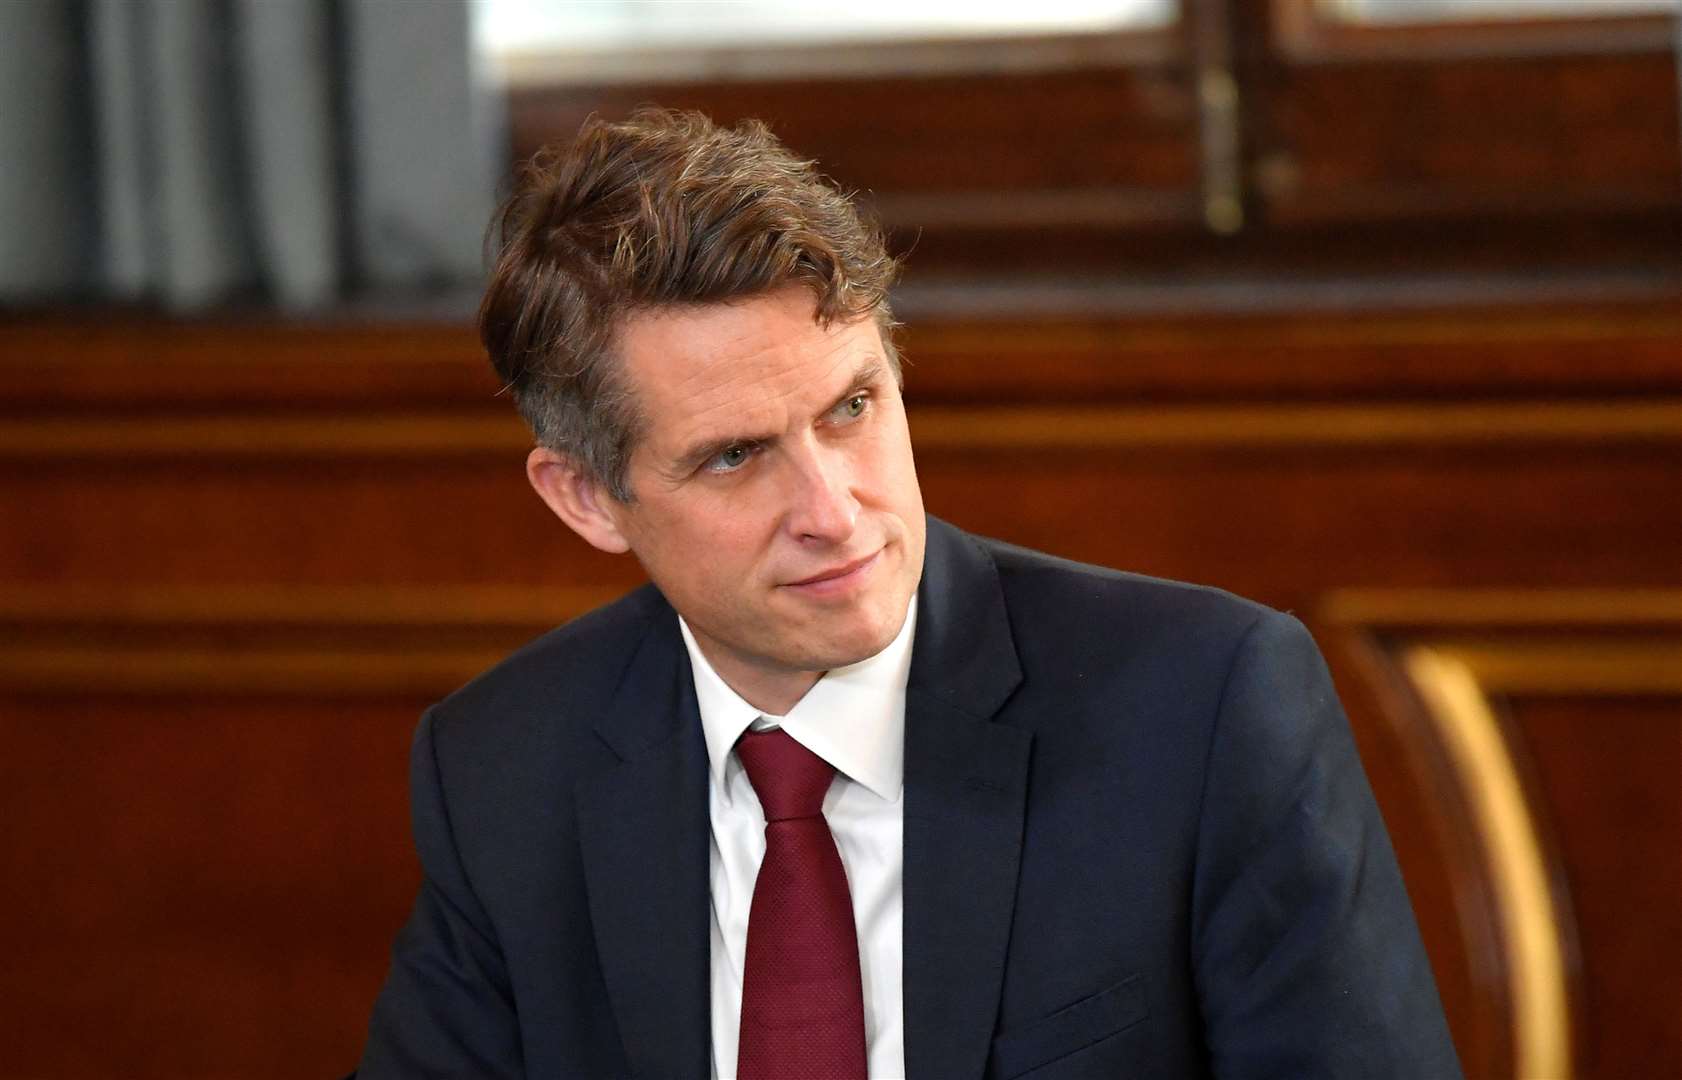 Gavin Williamson has said he wants schools to reopen as soon as possible (Toby Melville/PA)